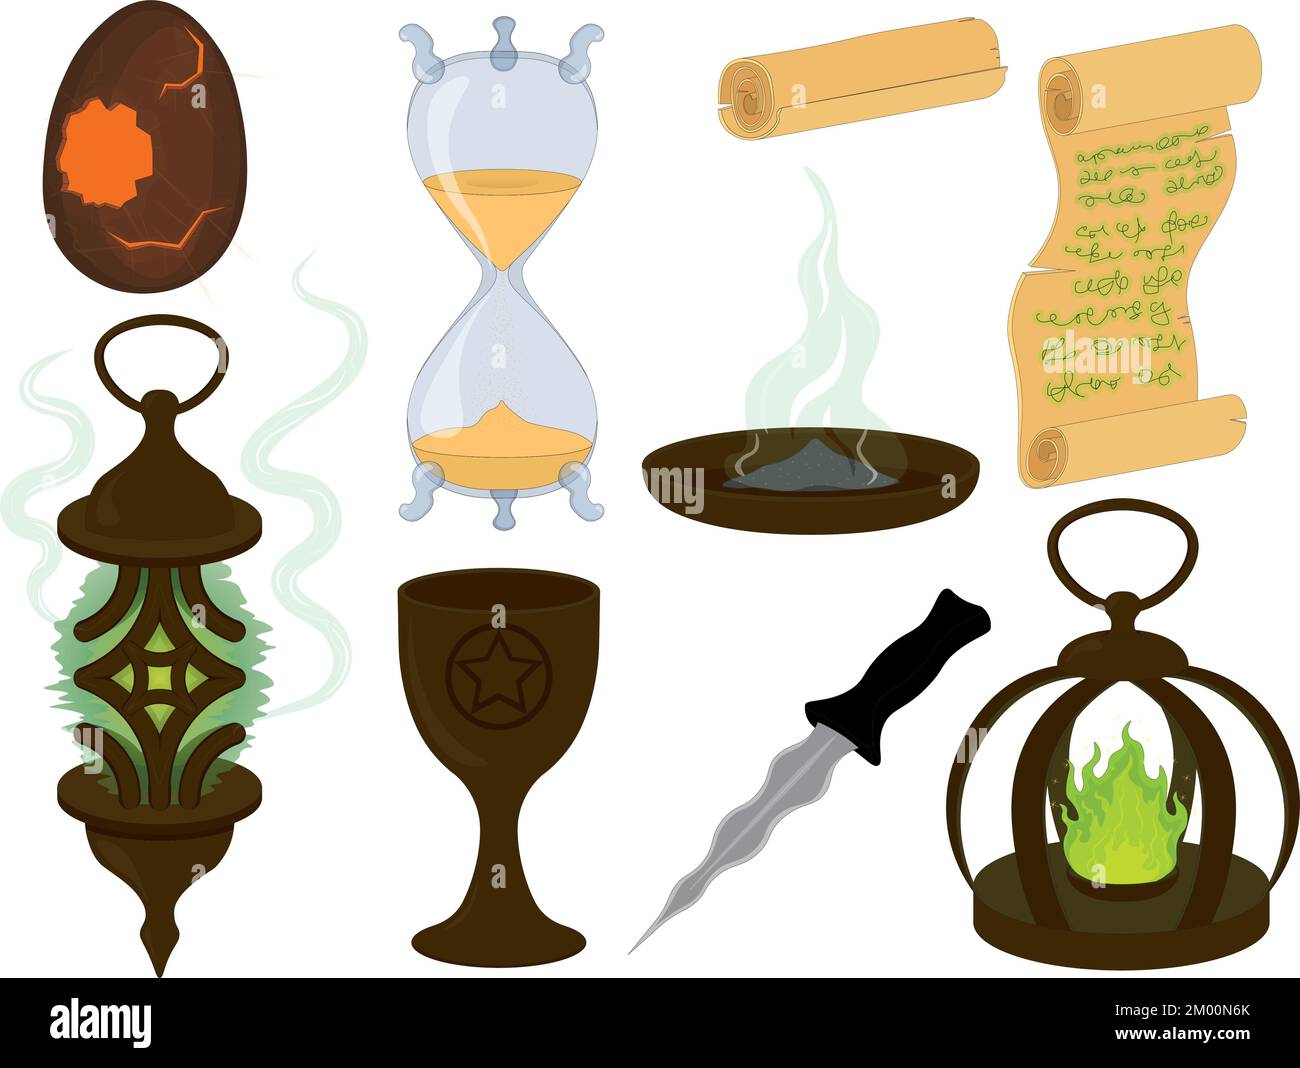 Witchcraft and magic items collection vector illustration Stock Vector